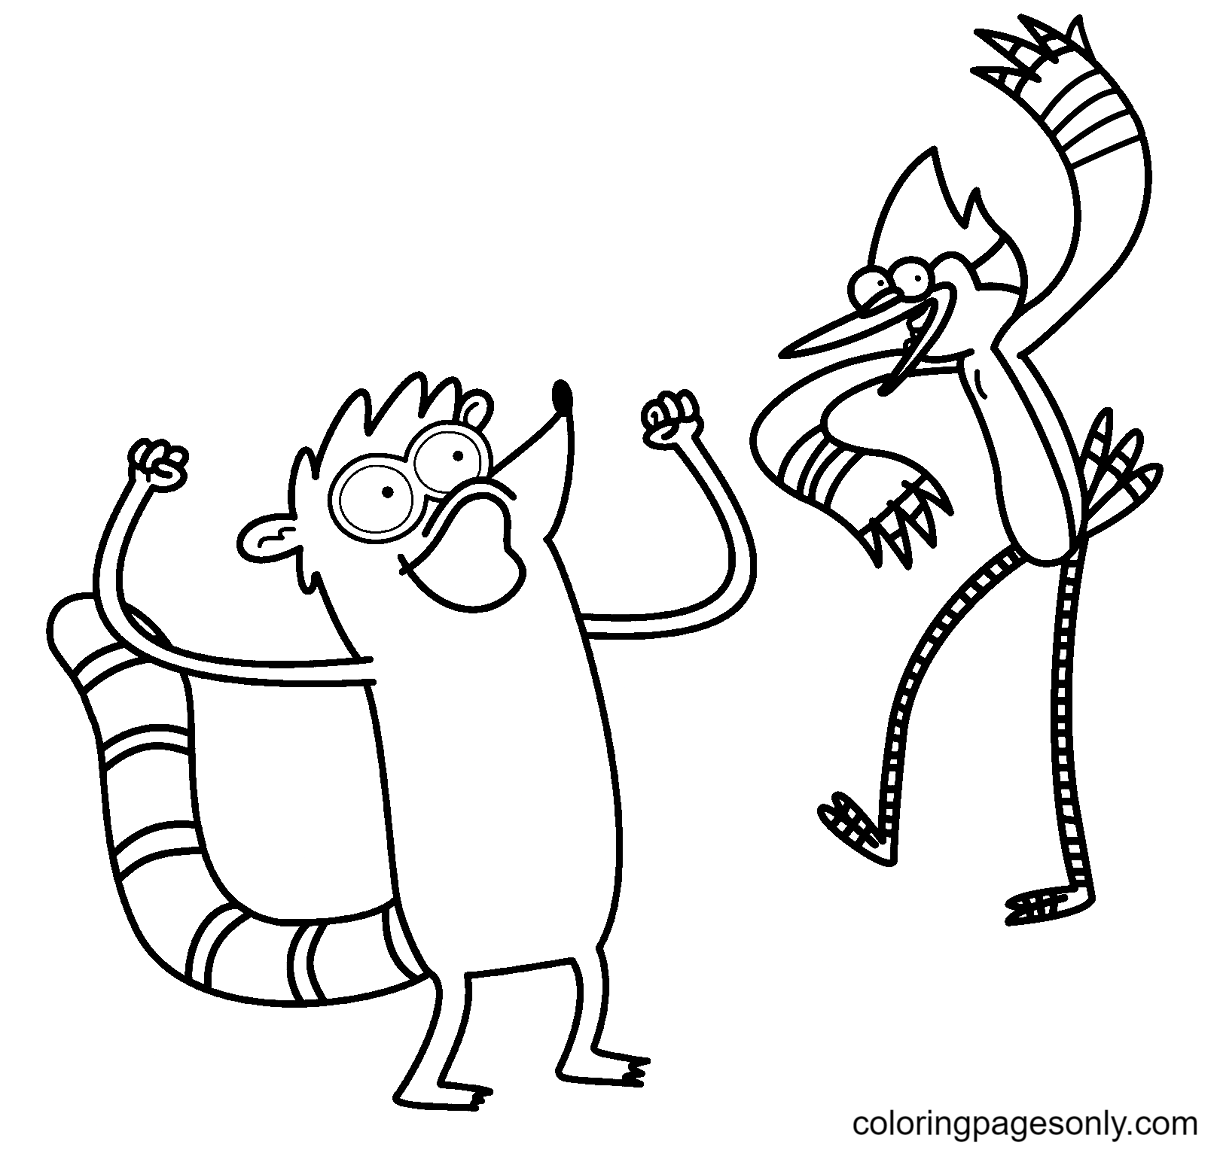 Funny Mordecai And Rigby Coloring Page